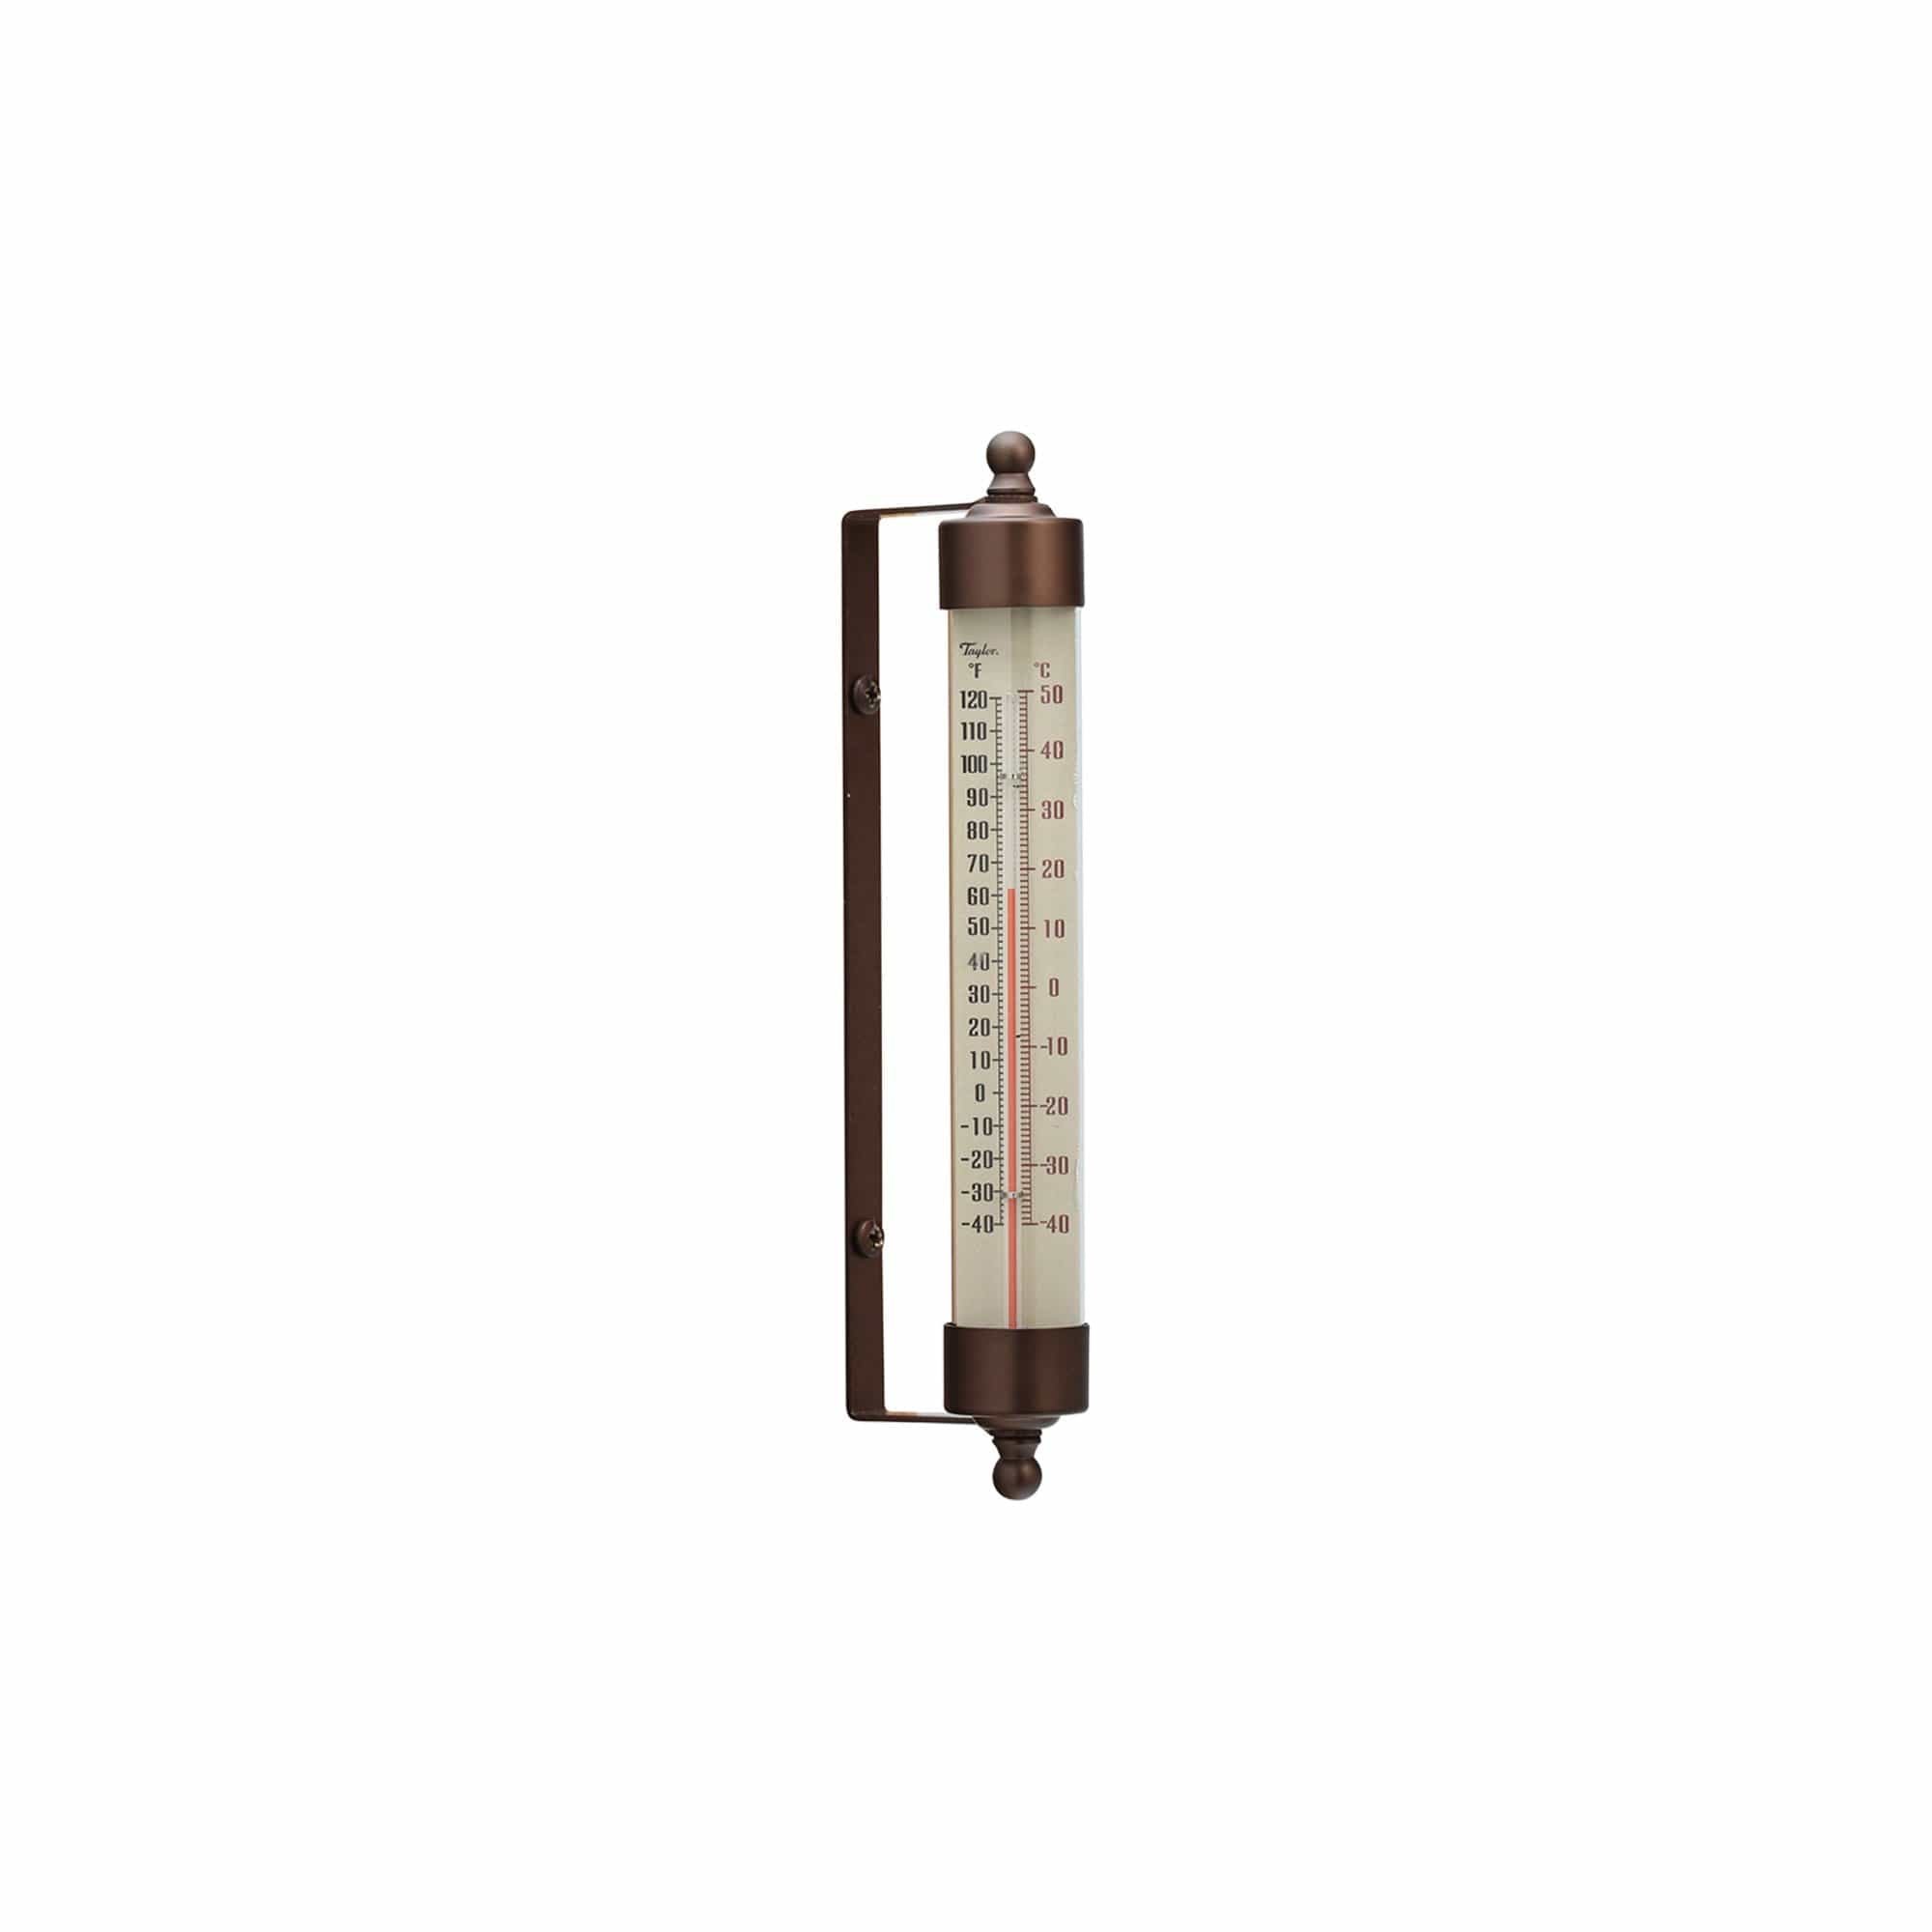 80th Anniversary 7-Inch Replica of Largest Glass Tube Thermometer in the  World